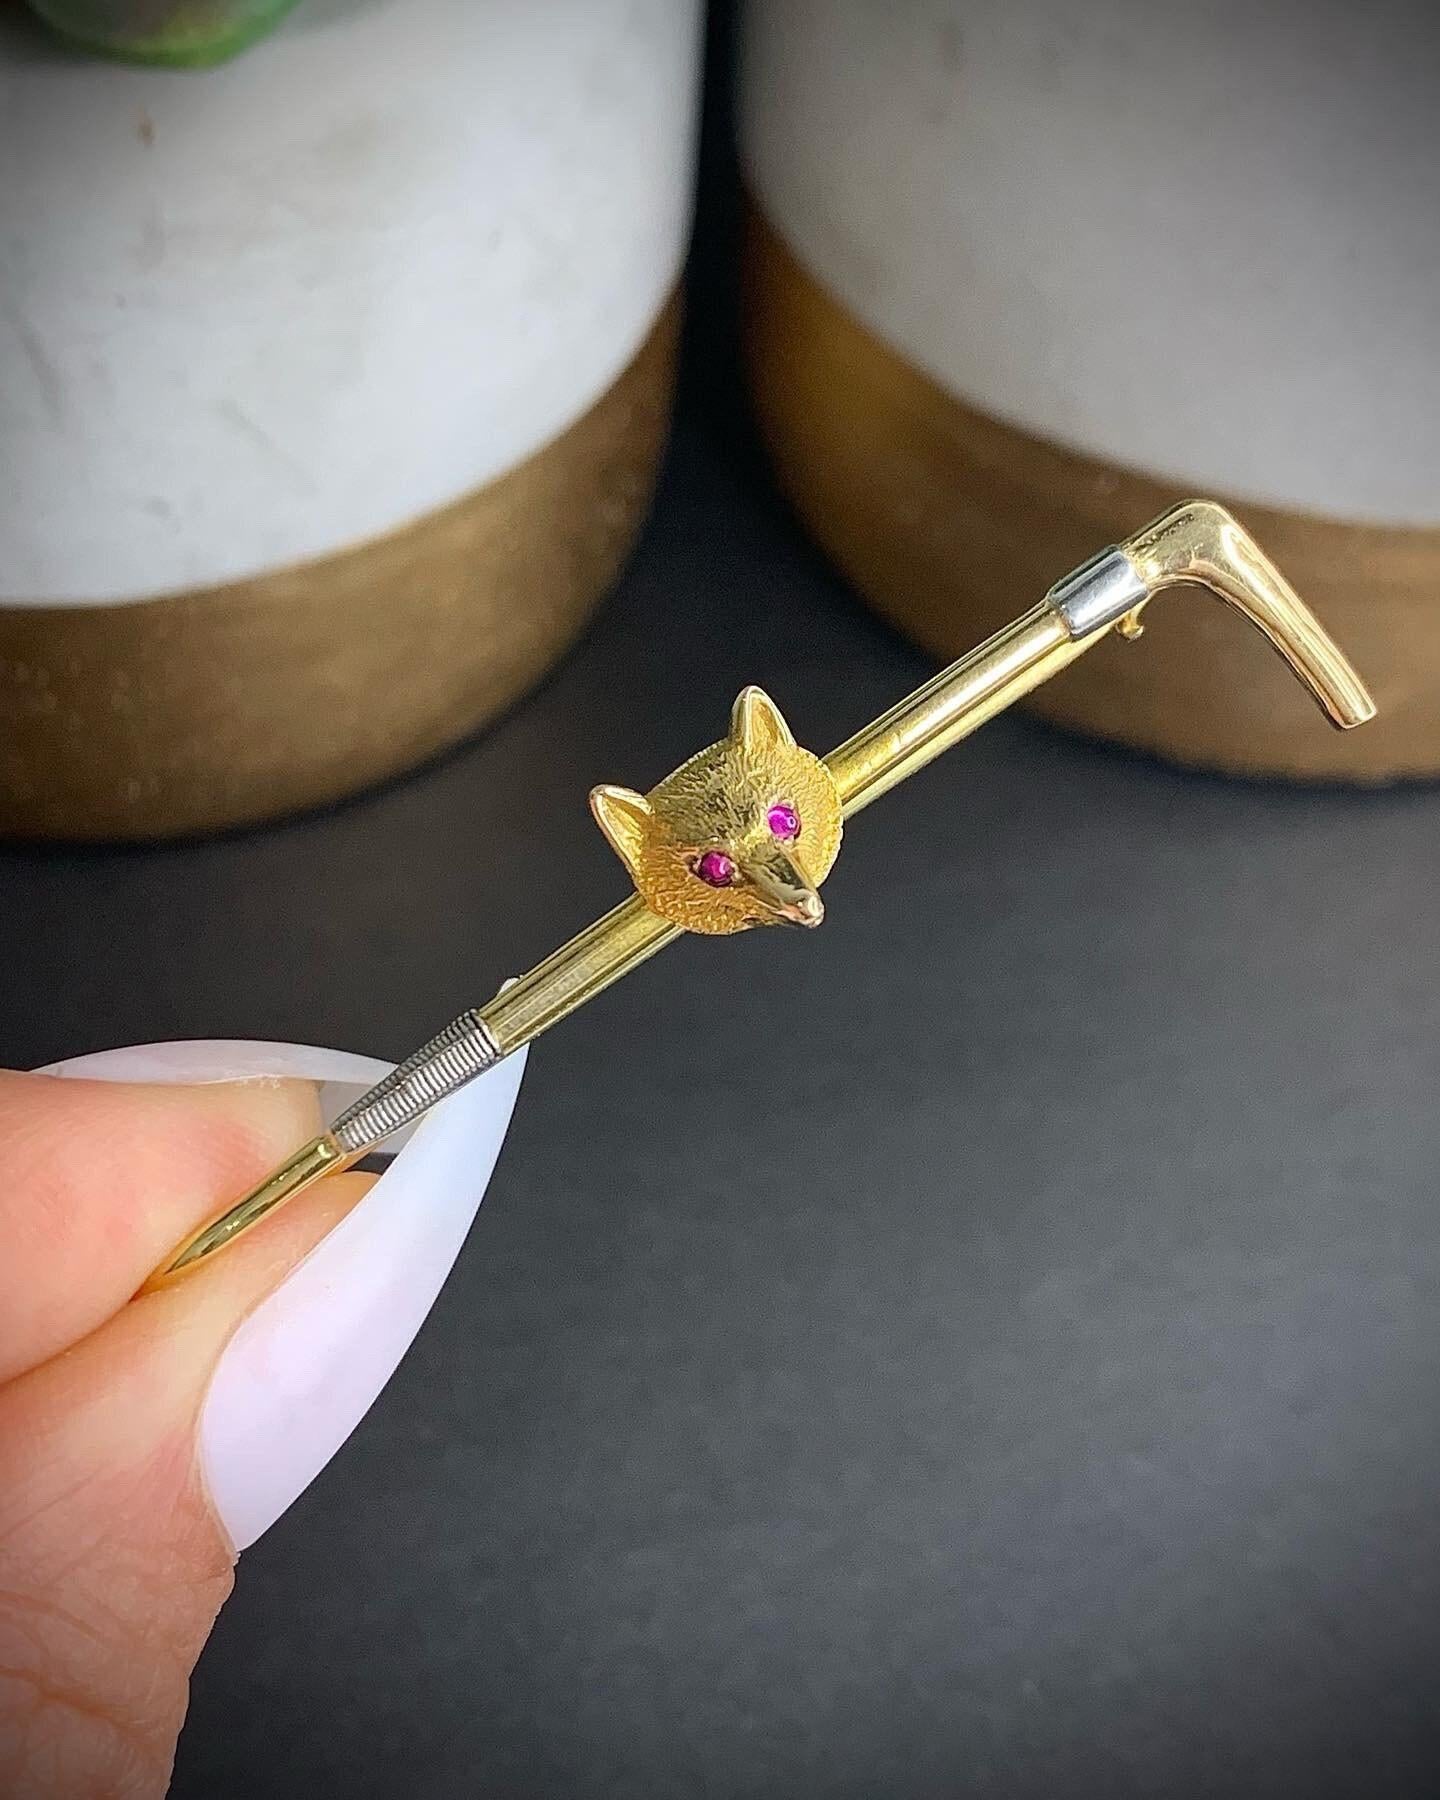 Gold Fox Brooch 

15ct Gold 

Victorian Circa 1880

Two Colour Gold Riding Crop Featuring a Gorgeous Little Fox’s Head, Set with Two Beautiful Little Ruby Eyes

Weight Approx 4.8g

Brooch Measures Approx 50mm Across
Foxes Head Approx 8mm 

All of